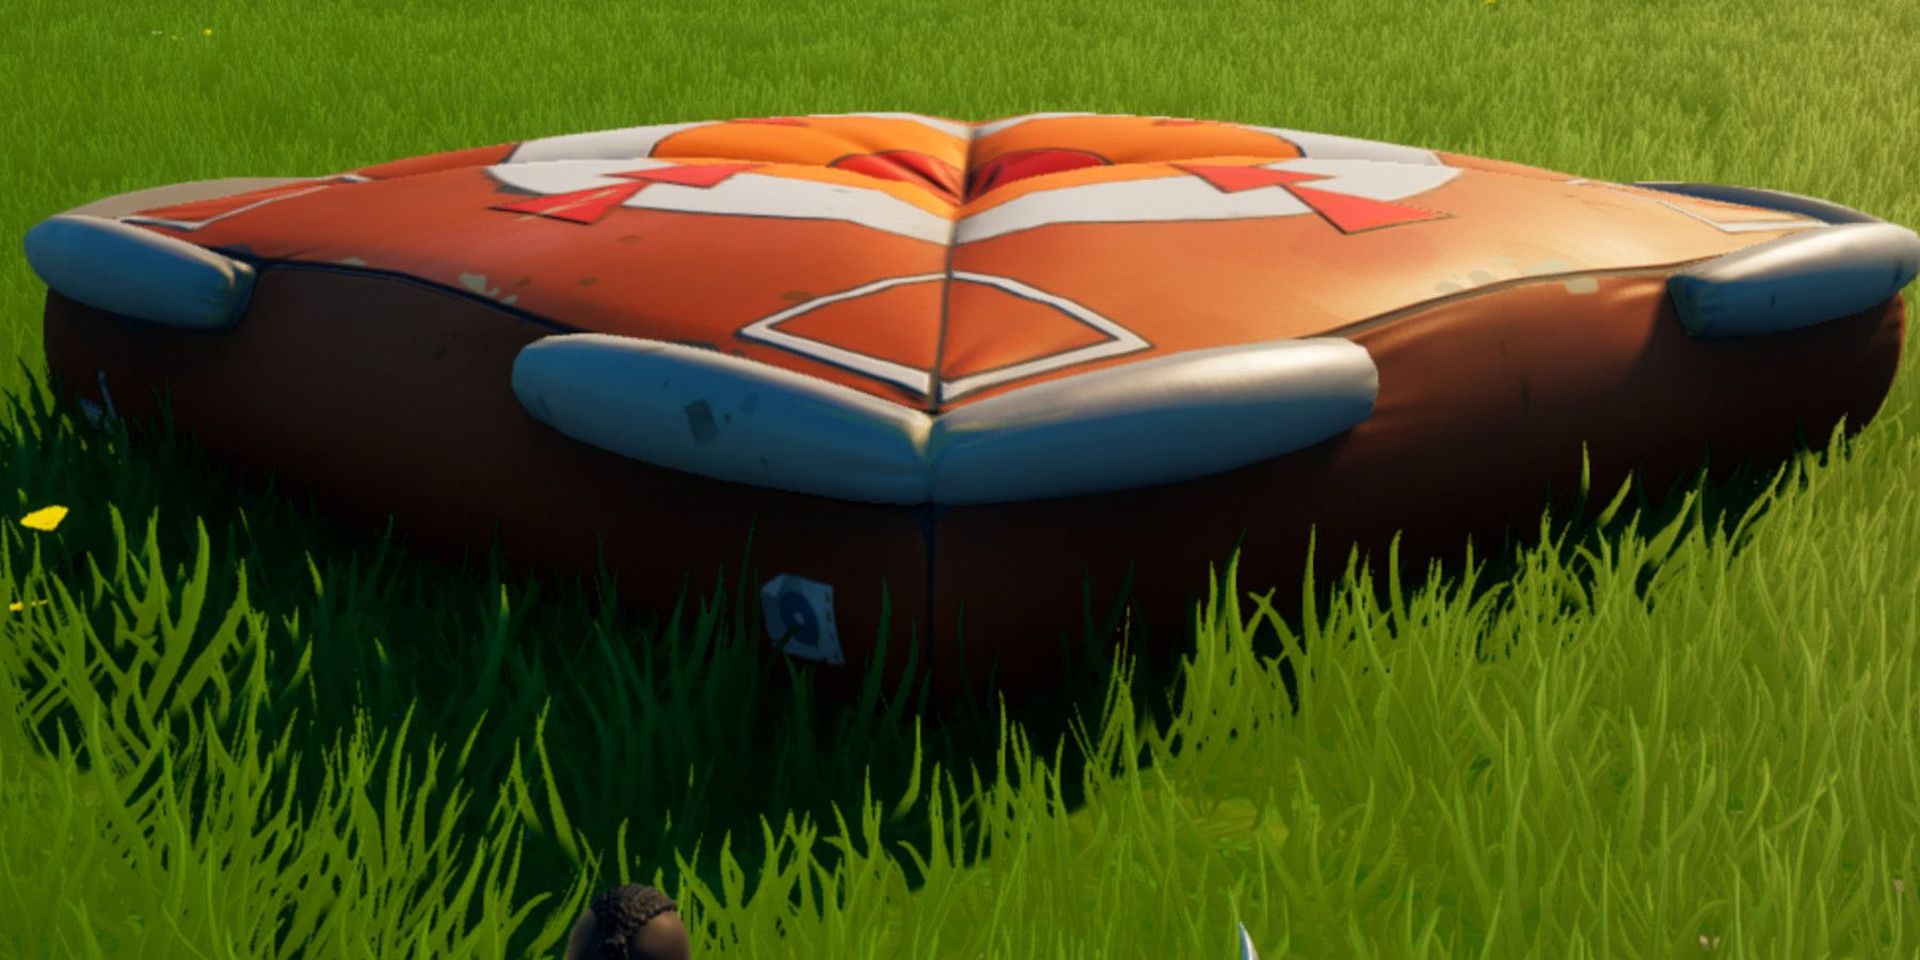 In Fortnite, the crash pad, a beloved utility item among fans that can be quite helpful in a variety of circumstances, has been unvaulted to increase the enjoyment this week.